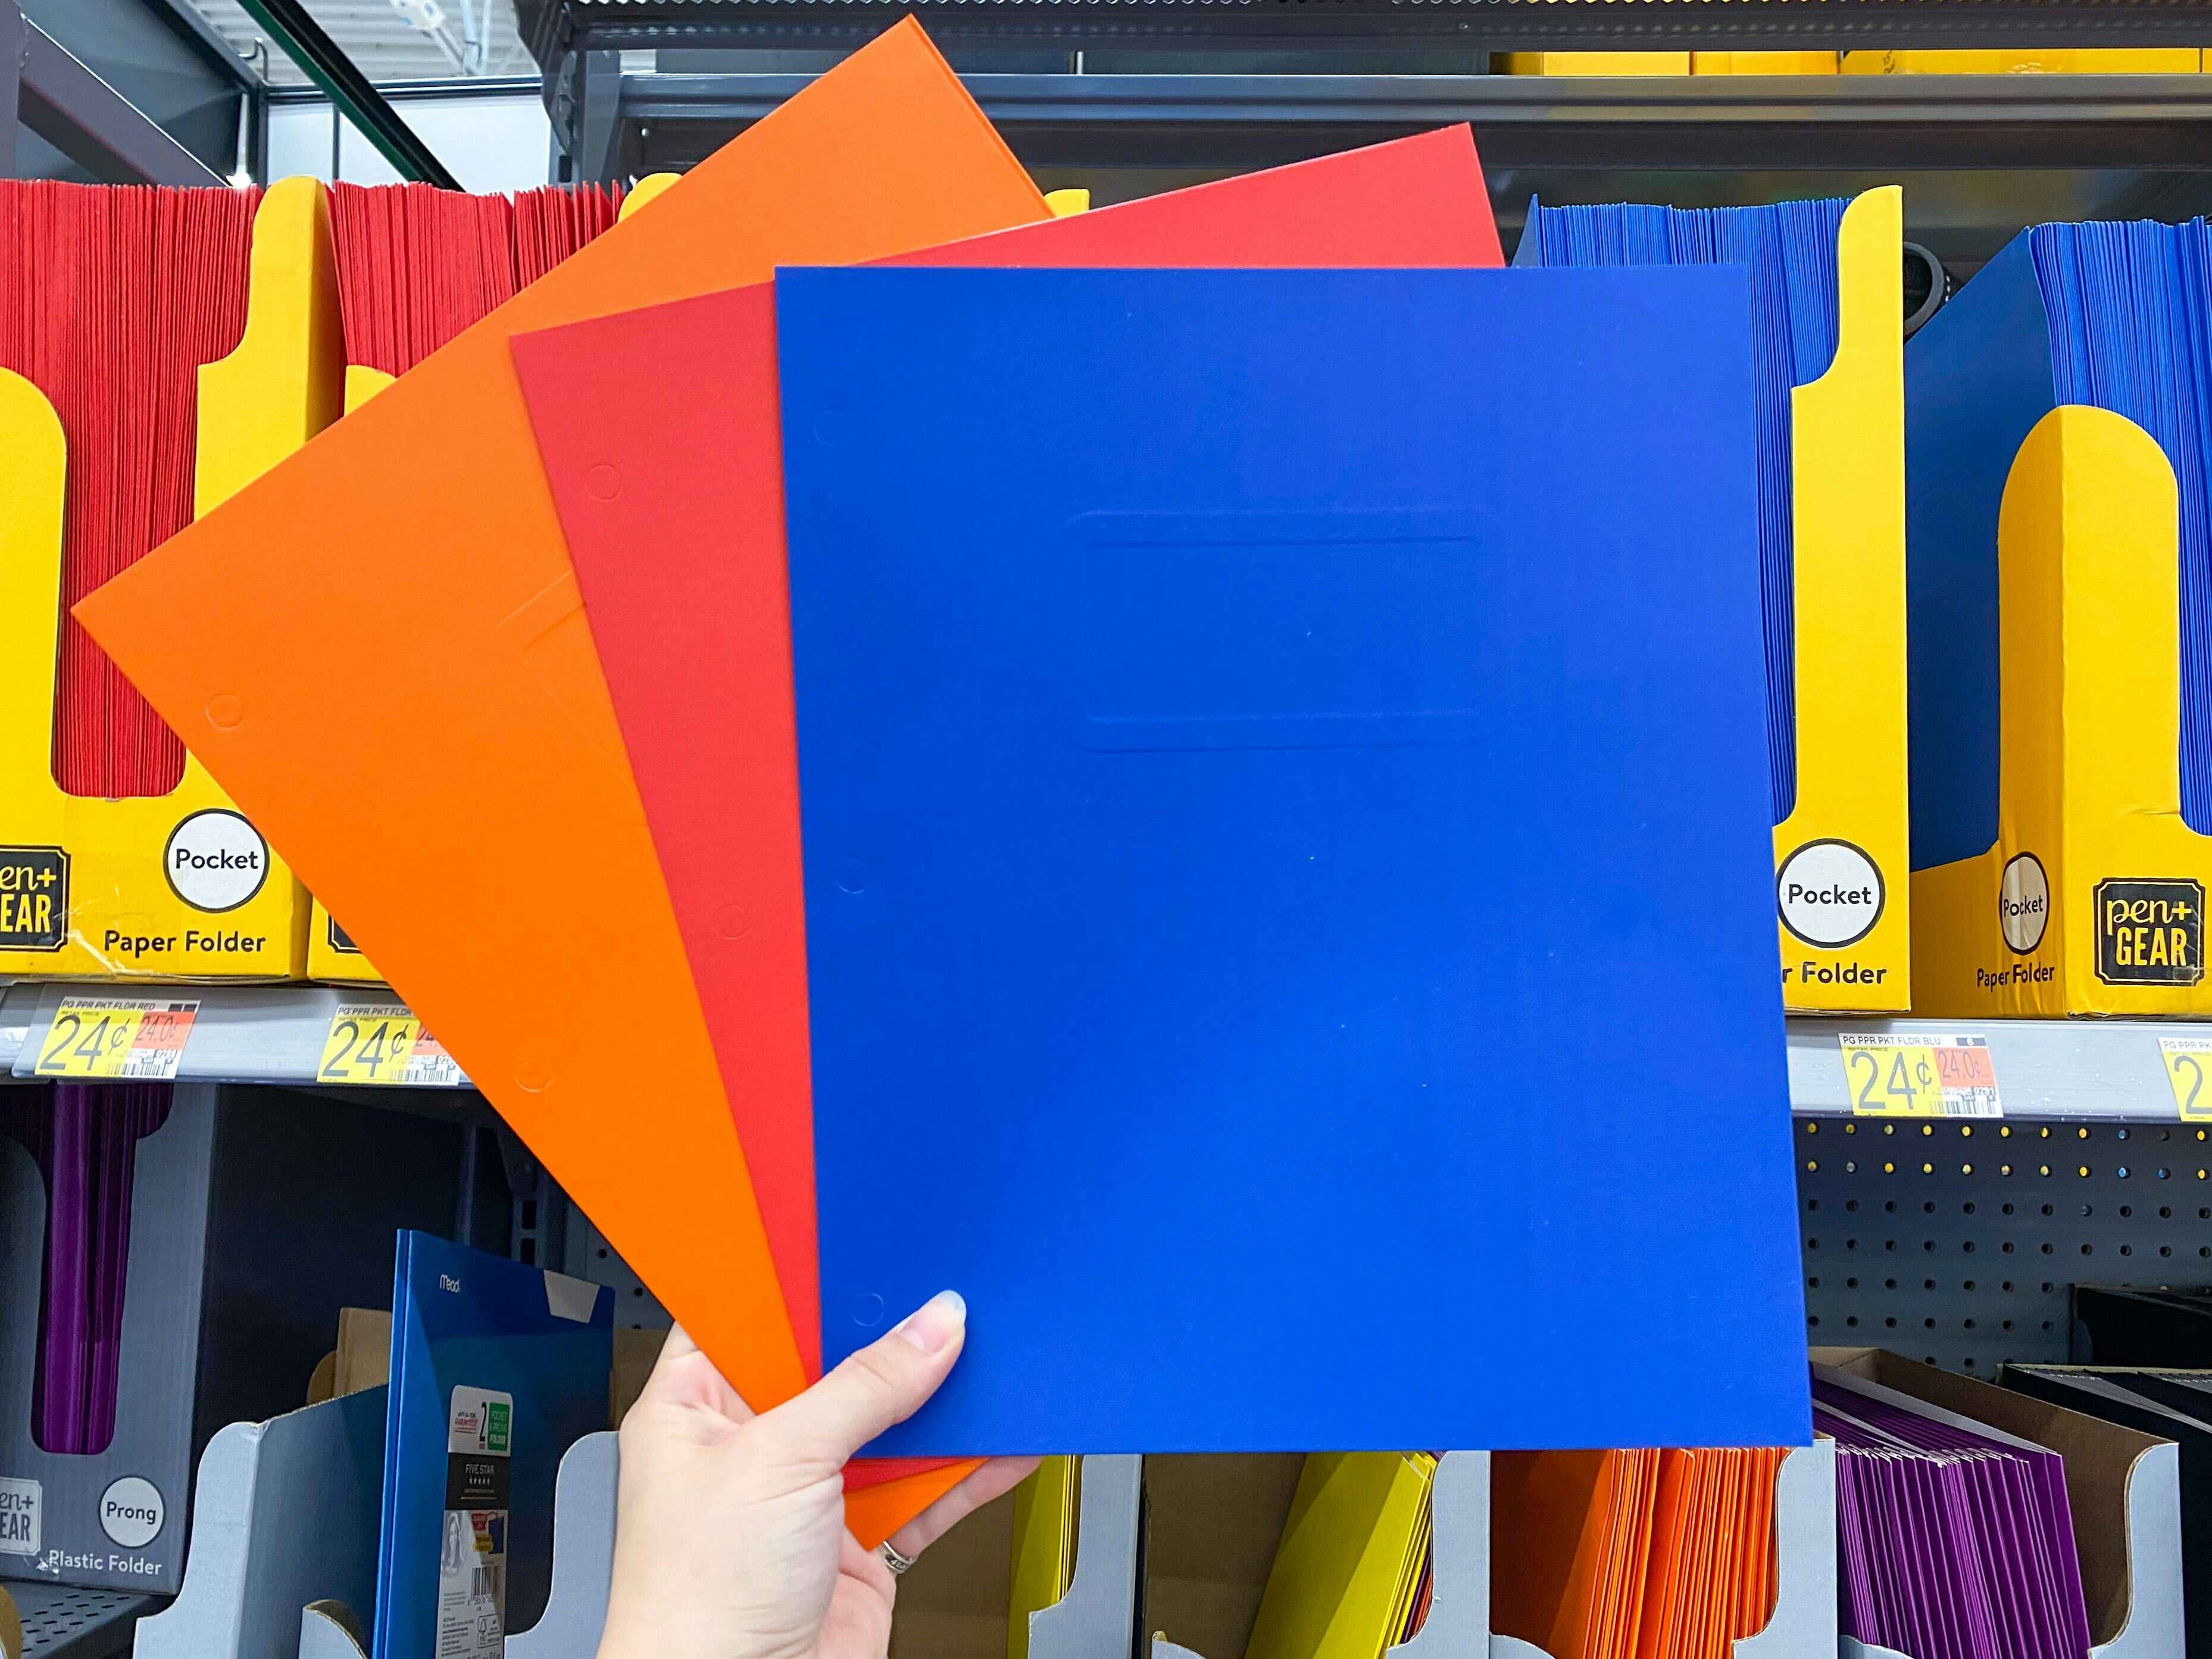 A person's hand holding up three different colored Pen+Gear paper folders in front of a shelf at Walmart.